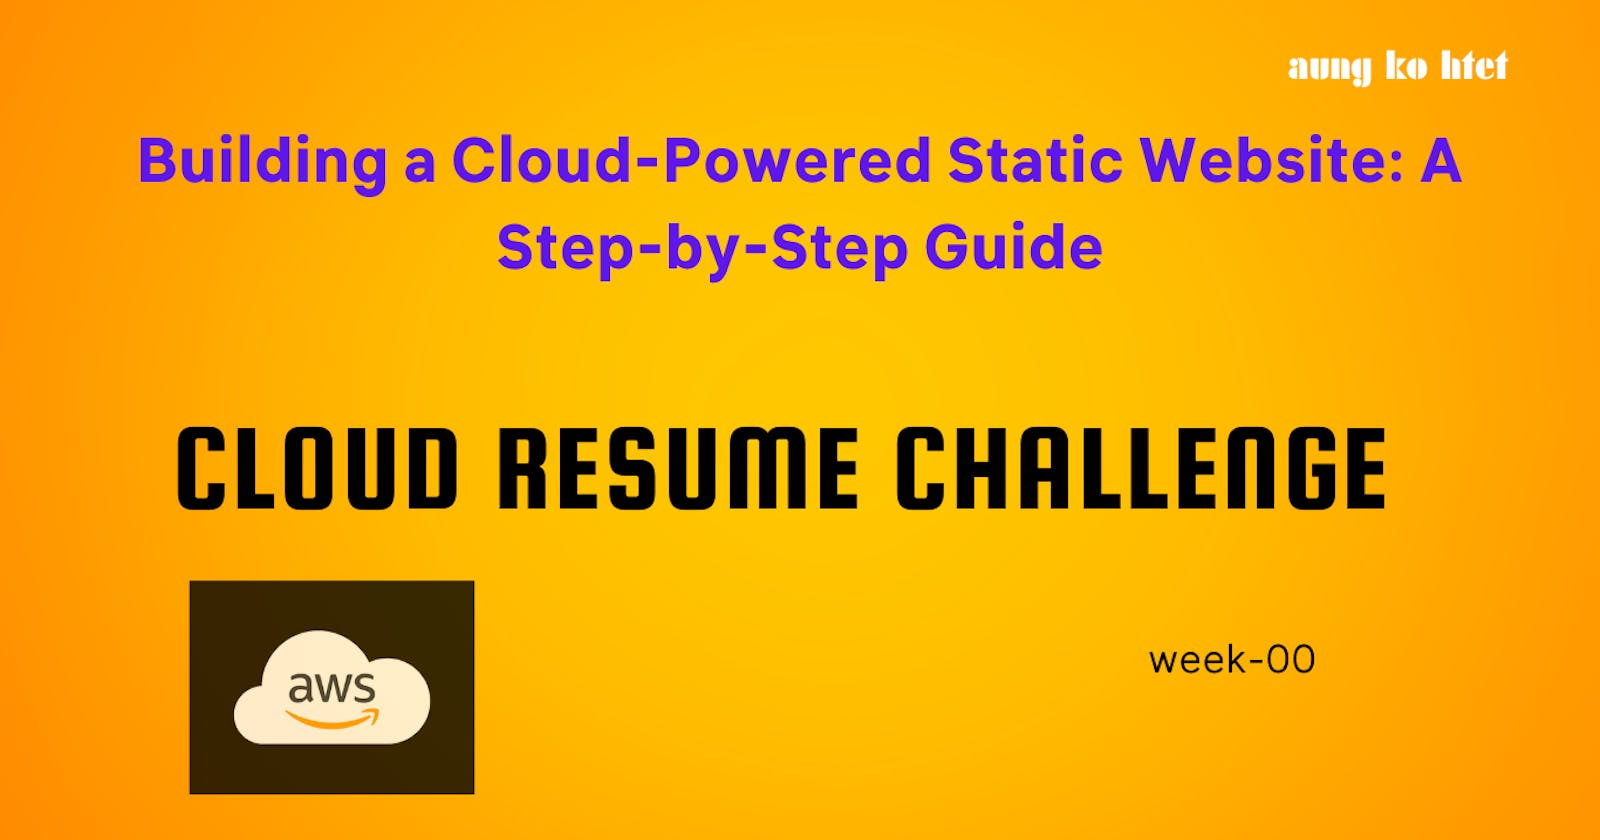 Building a Cloud-Powered Static Website: A Step-by-Step Guide
week-00